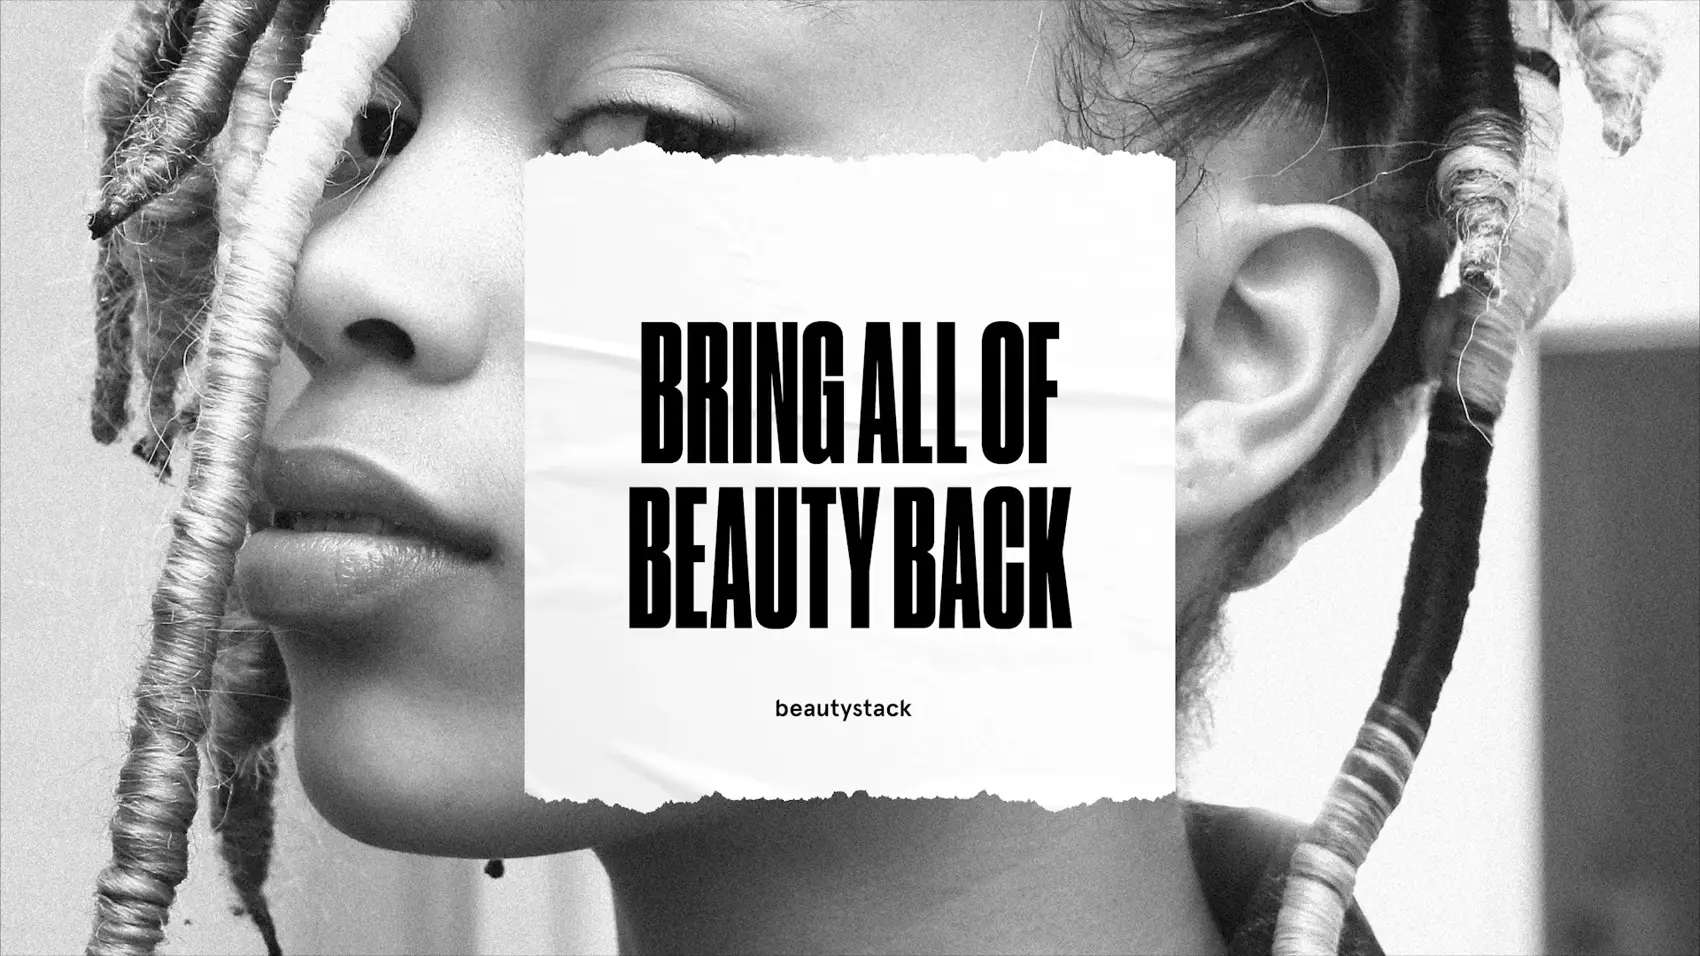 Bring all of beauty back video thumbnail